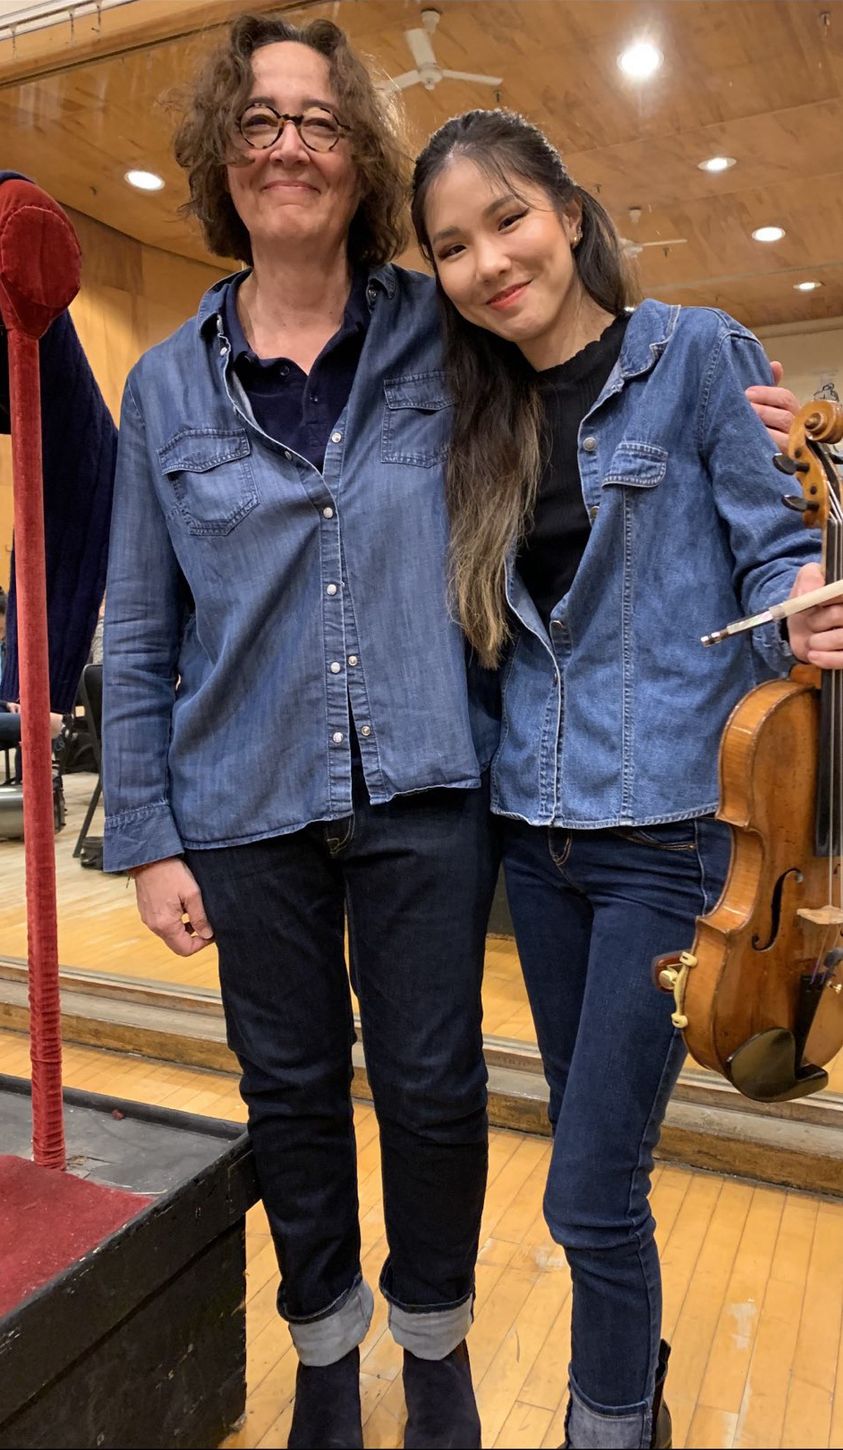 Look! Matching maestro and concertmaster